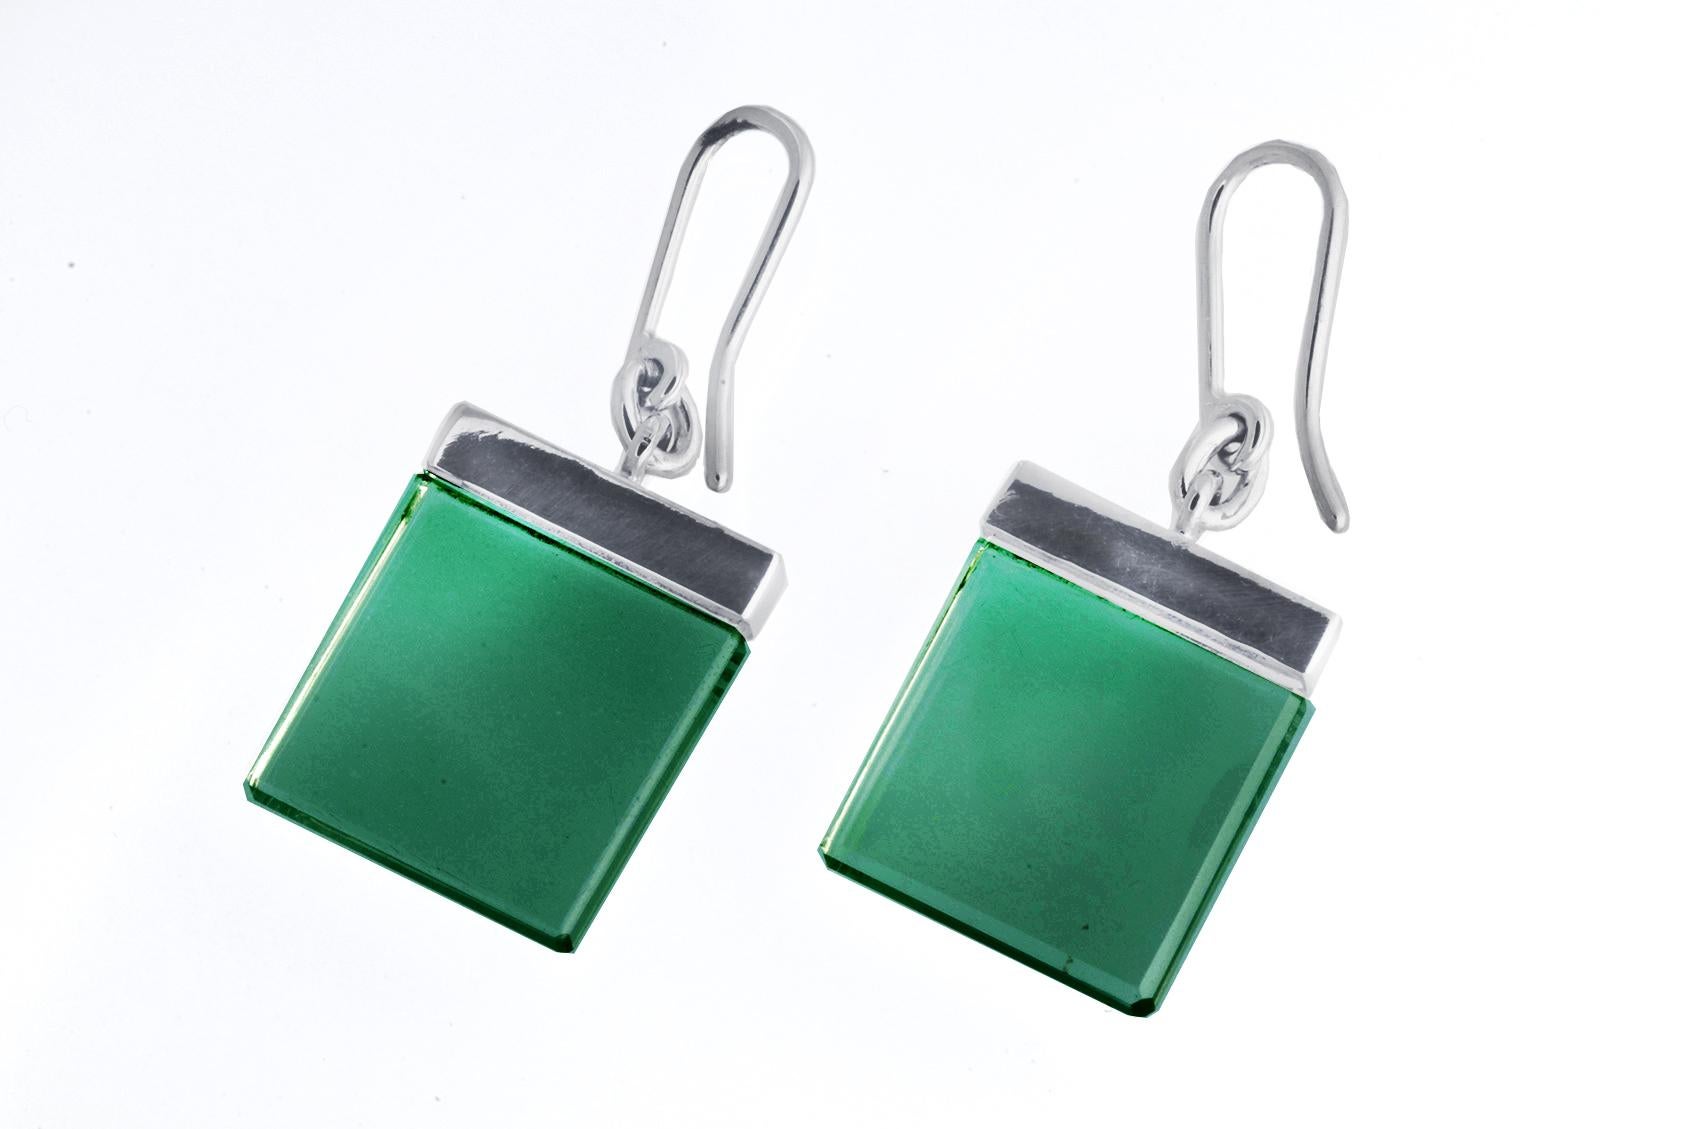 This jewellery collection, designed as sculptures by oil painter Polya Medvedeva from Berlin, was featured in Harper's Bazaar UA and Vogue UA publications.

These earrings are made of 14 karat white gold and feature dark green grown quartzes